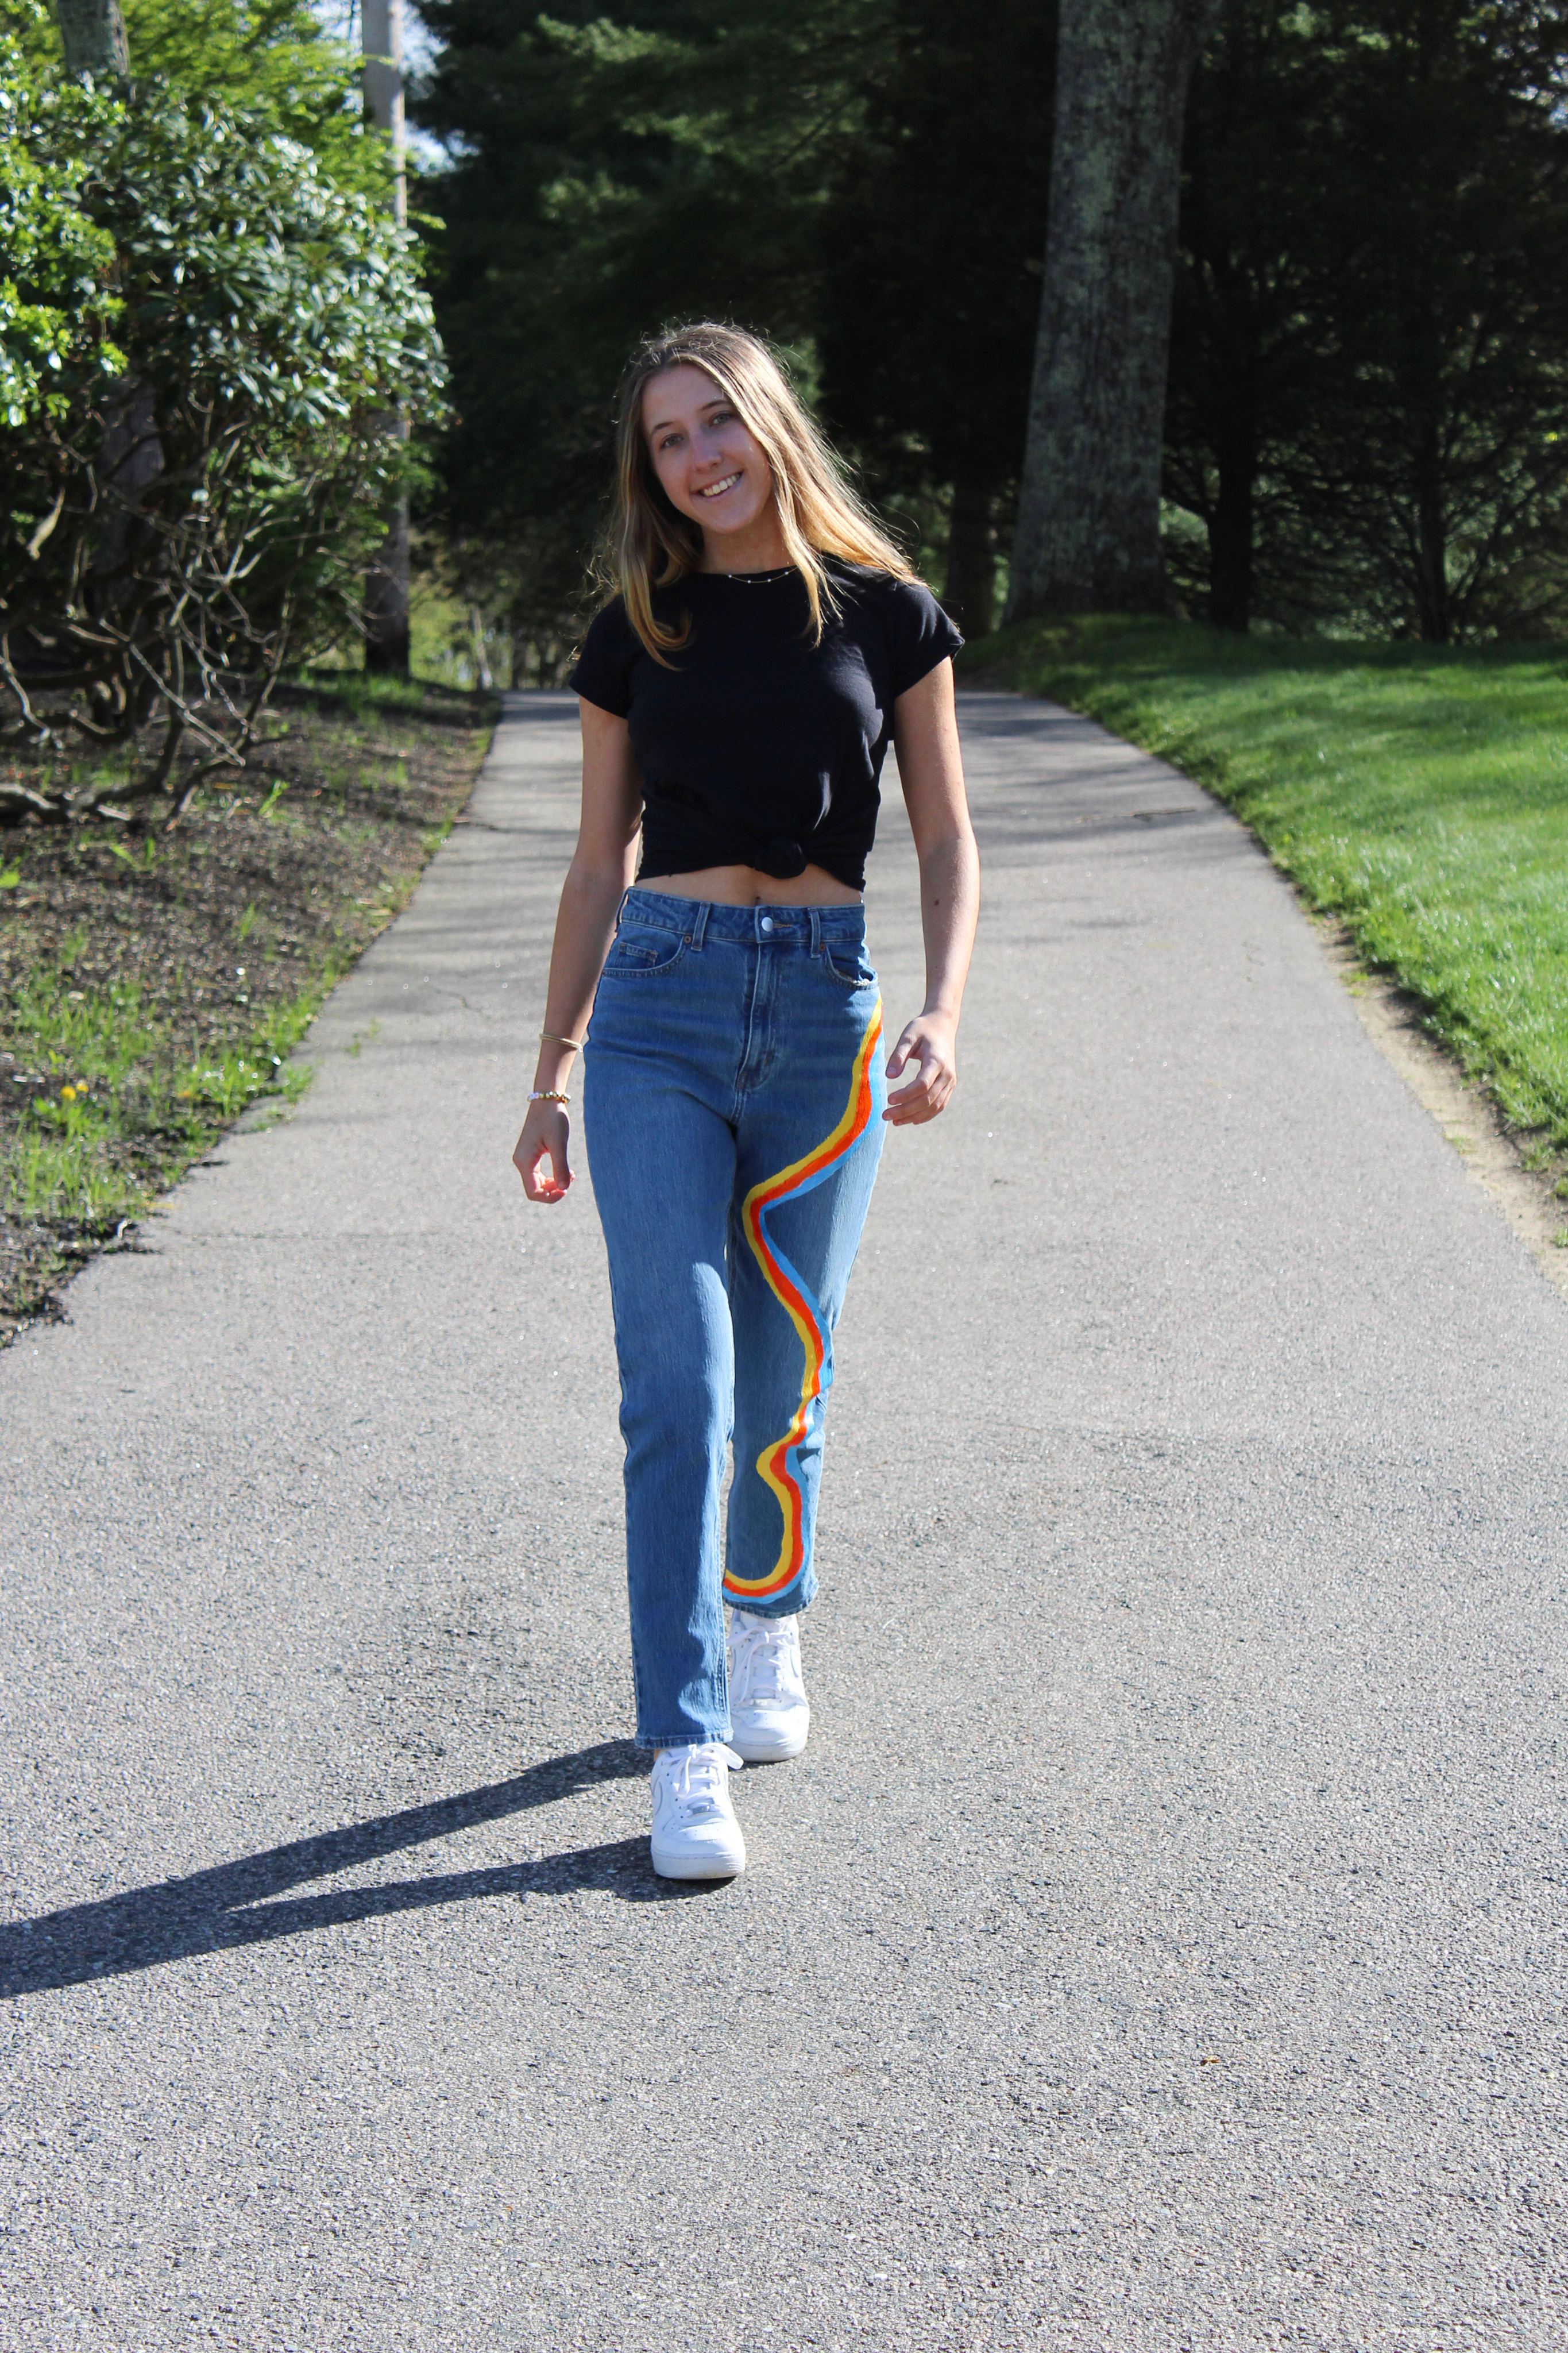 Girl walking down path in black t-shirt and jeans painted with stripes of color down one leg.